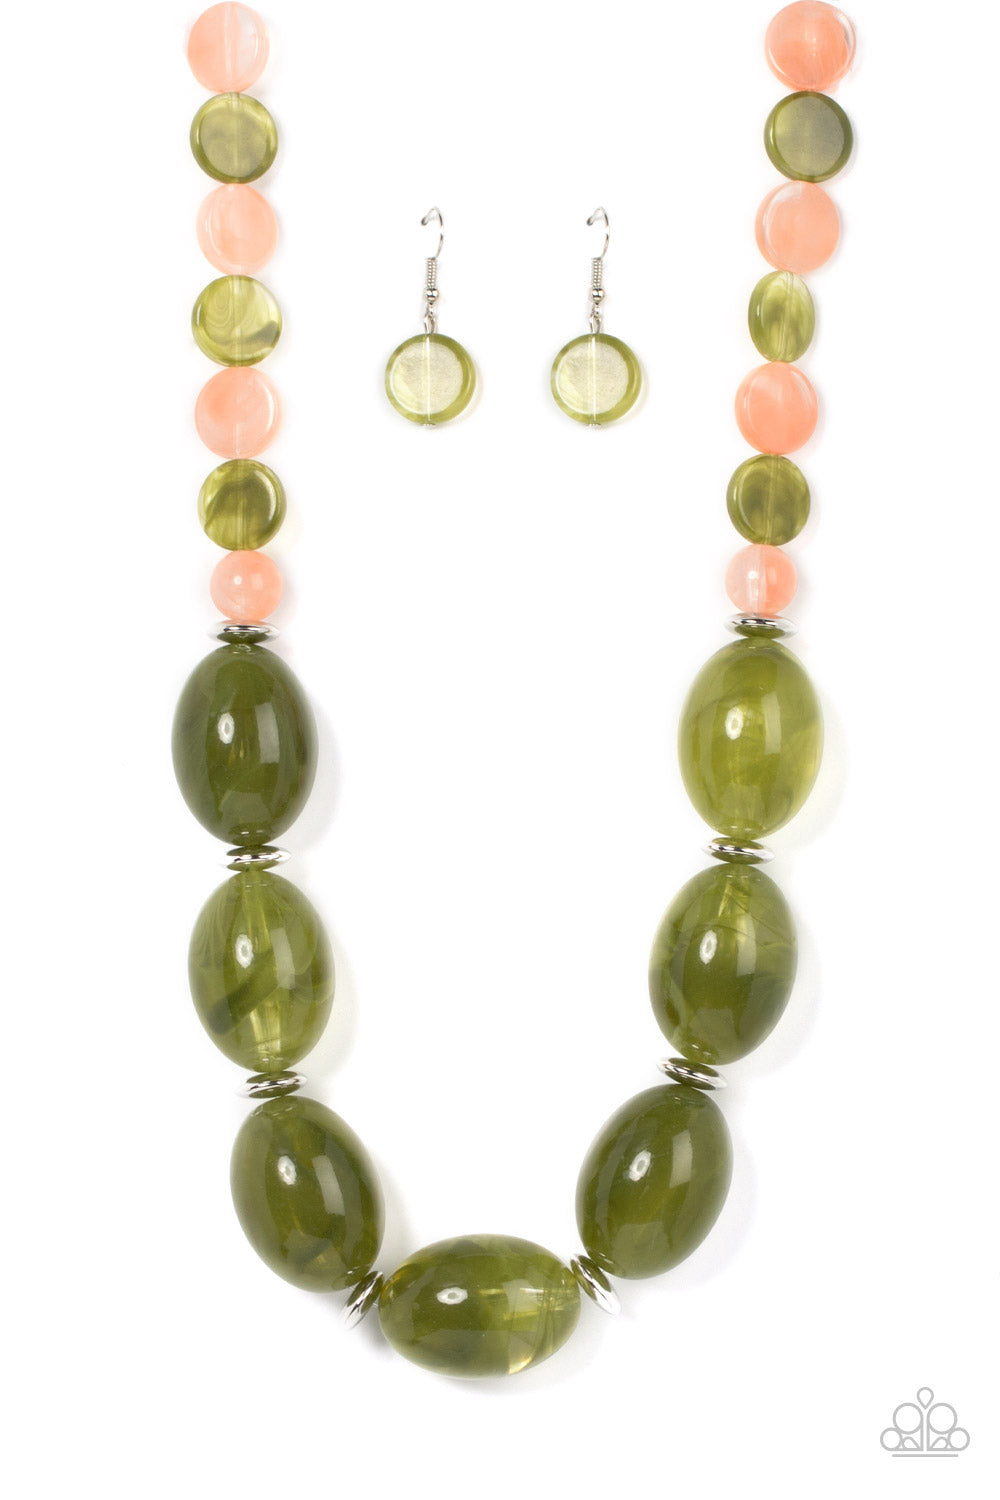 Paparazzi Accessories - Belle of the Beach #N26 Peg - Green Necklace